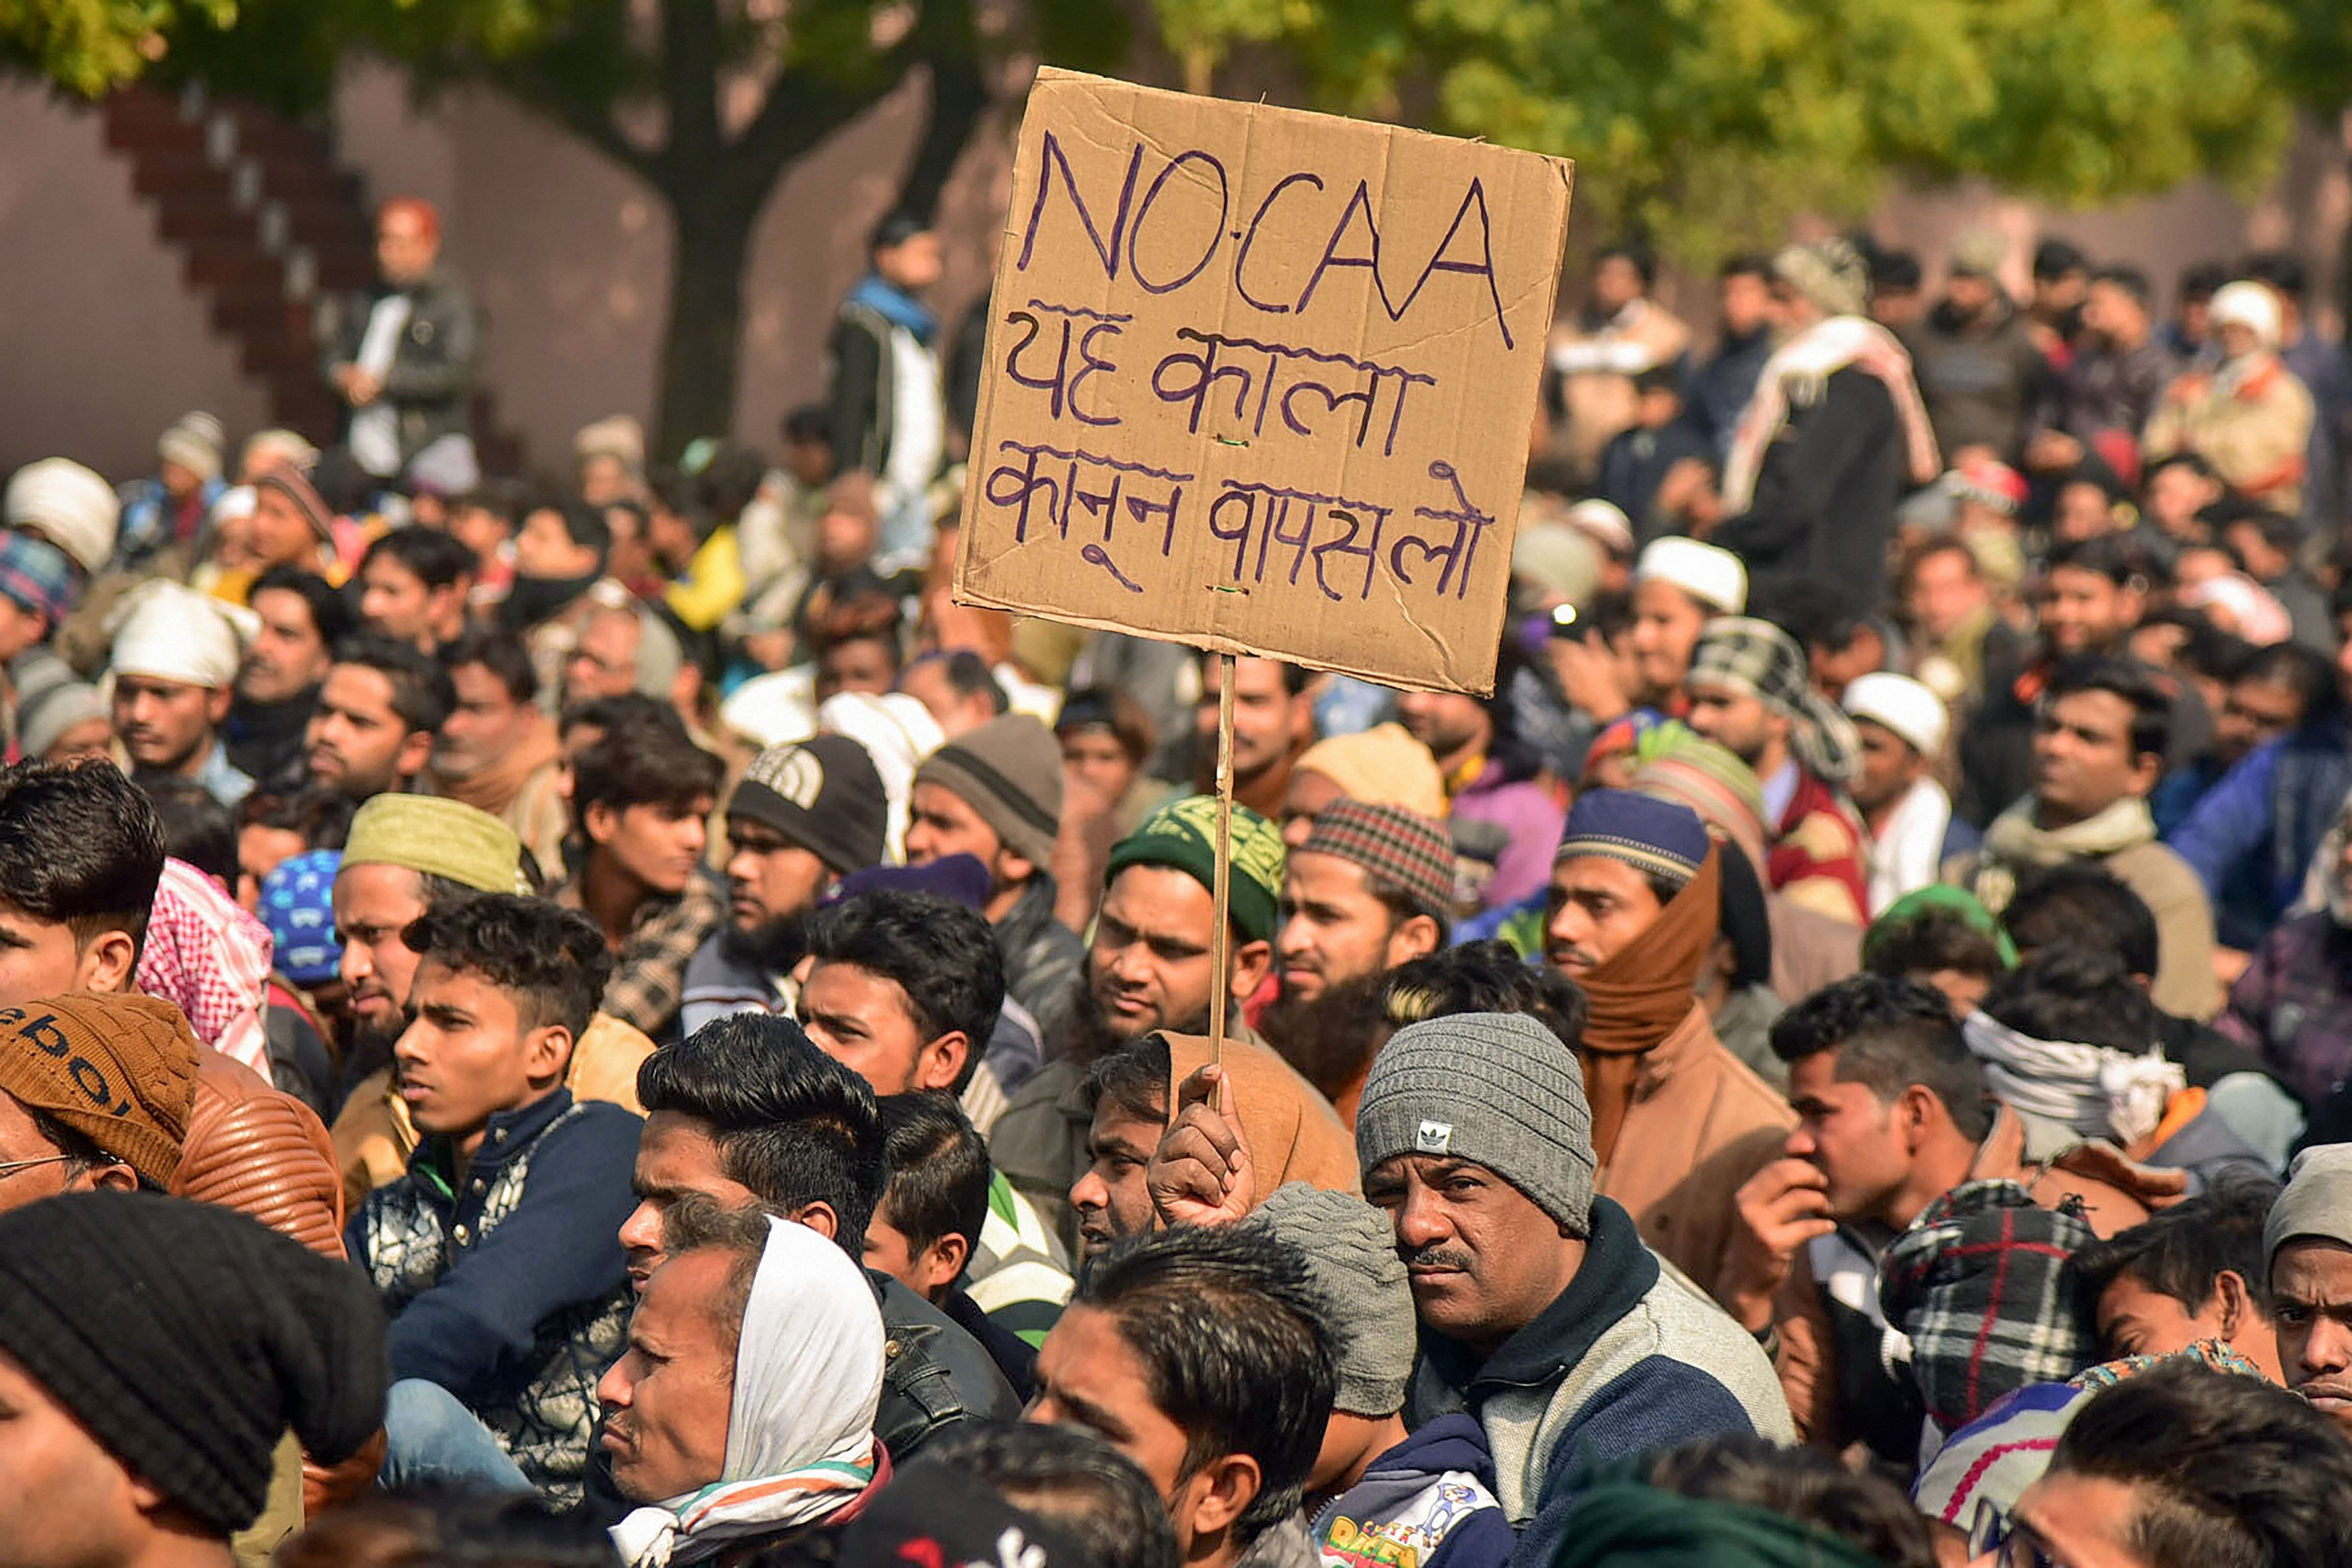  Protestors participate in a demonstration against CAA and NRC at Shahjamal Eidgah in Aligarh, Wednesday, Jan. 22, 2020. (PTI Photo)